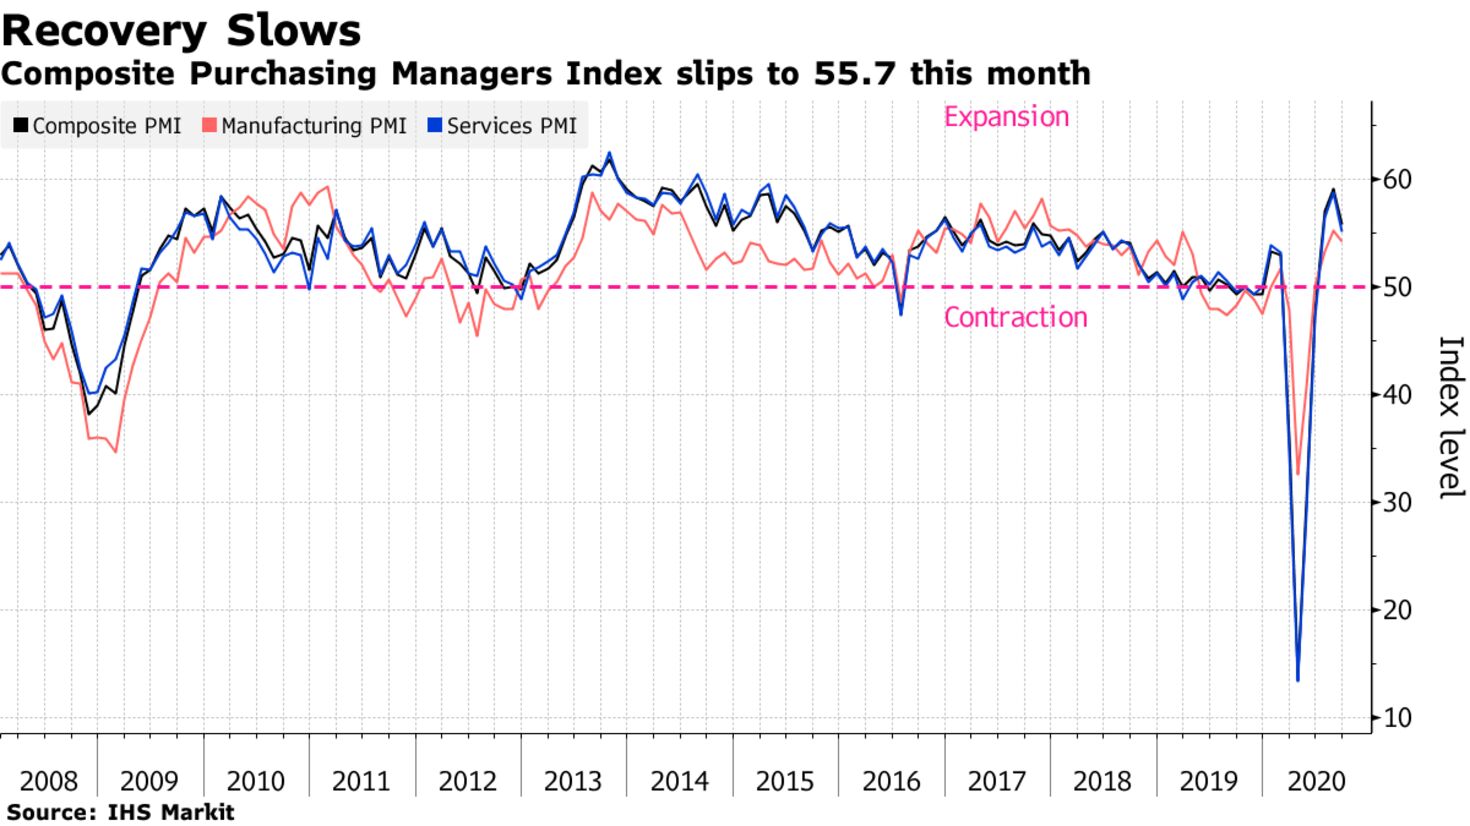 Composite Purchasing Managers Index slips to 55.7 this month